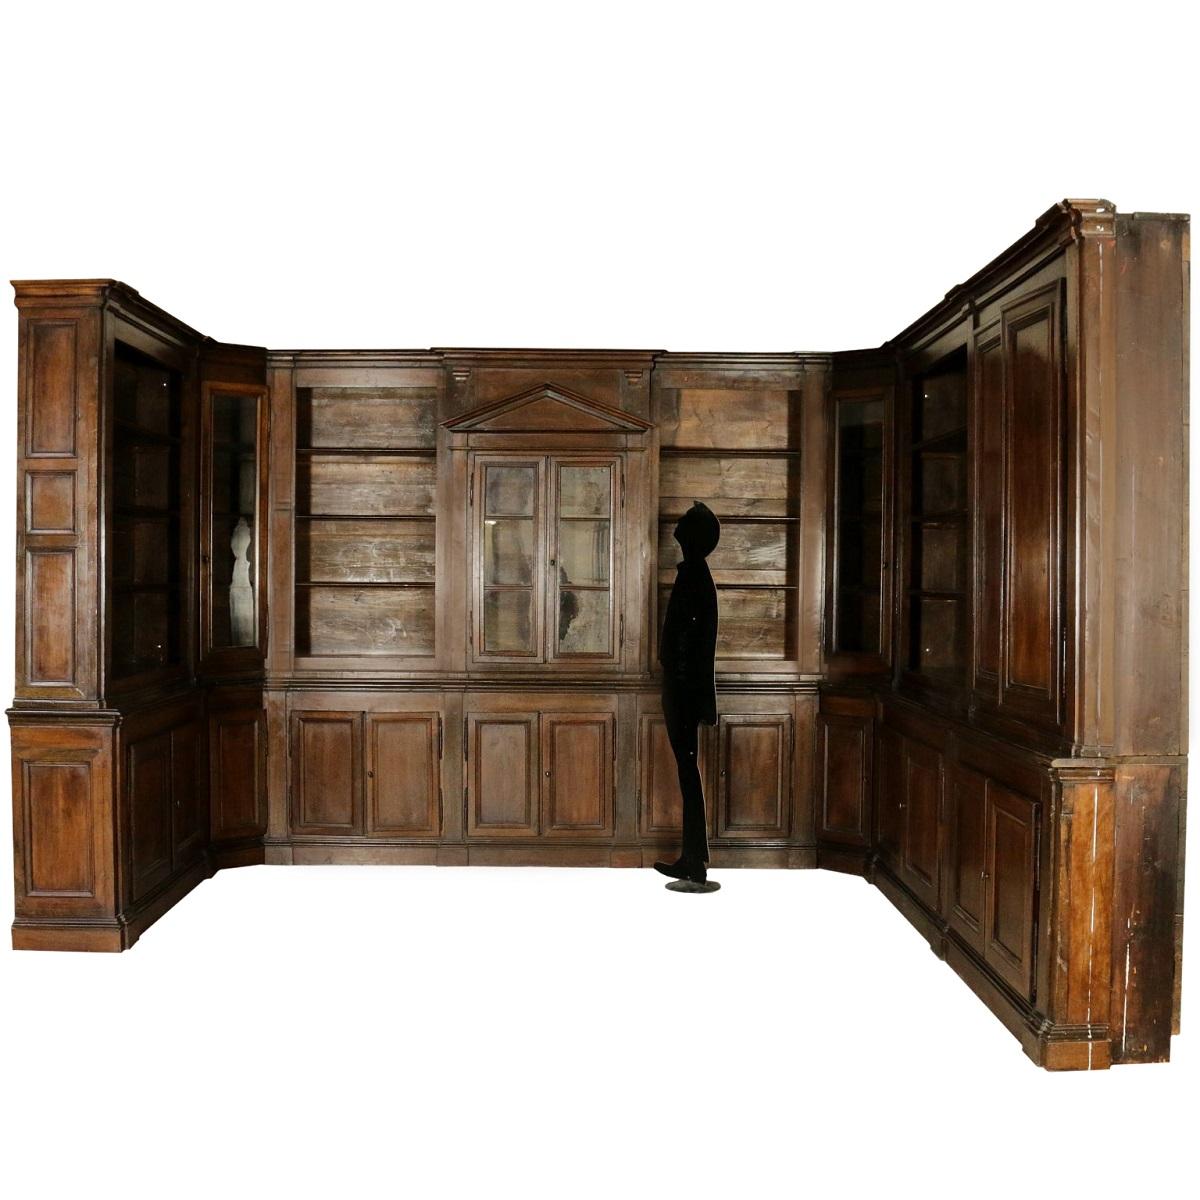 A good late 18th century Italian Neoclassical library room panneling. This room consists of one central bookcase with a tympan centerpiece. At both sides angle cabinets with hand blown glass are integrated. They are followed at both angles with an